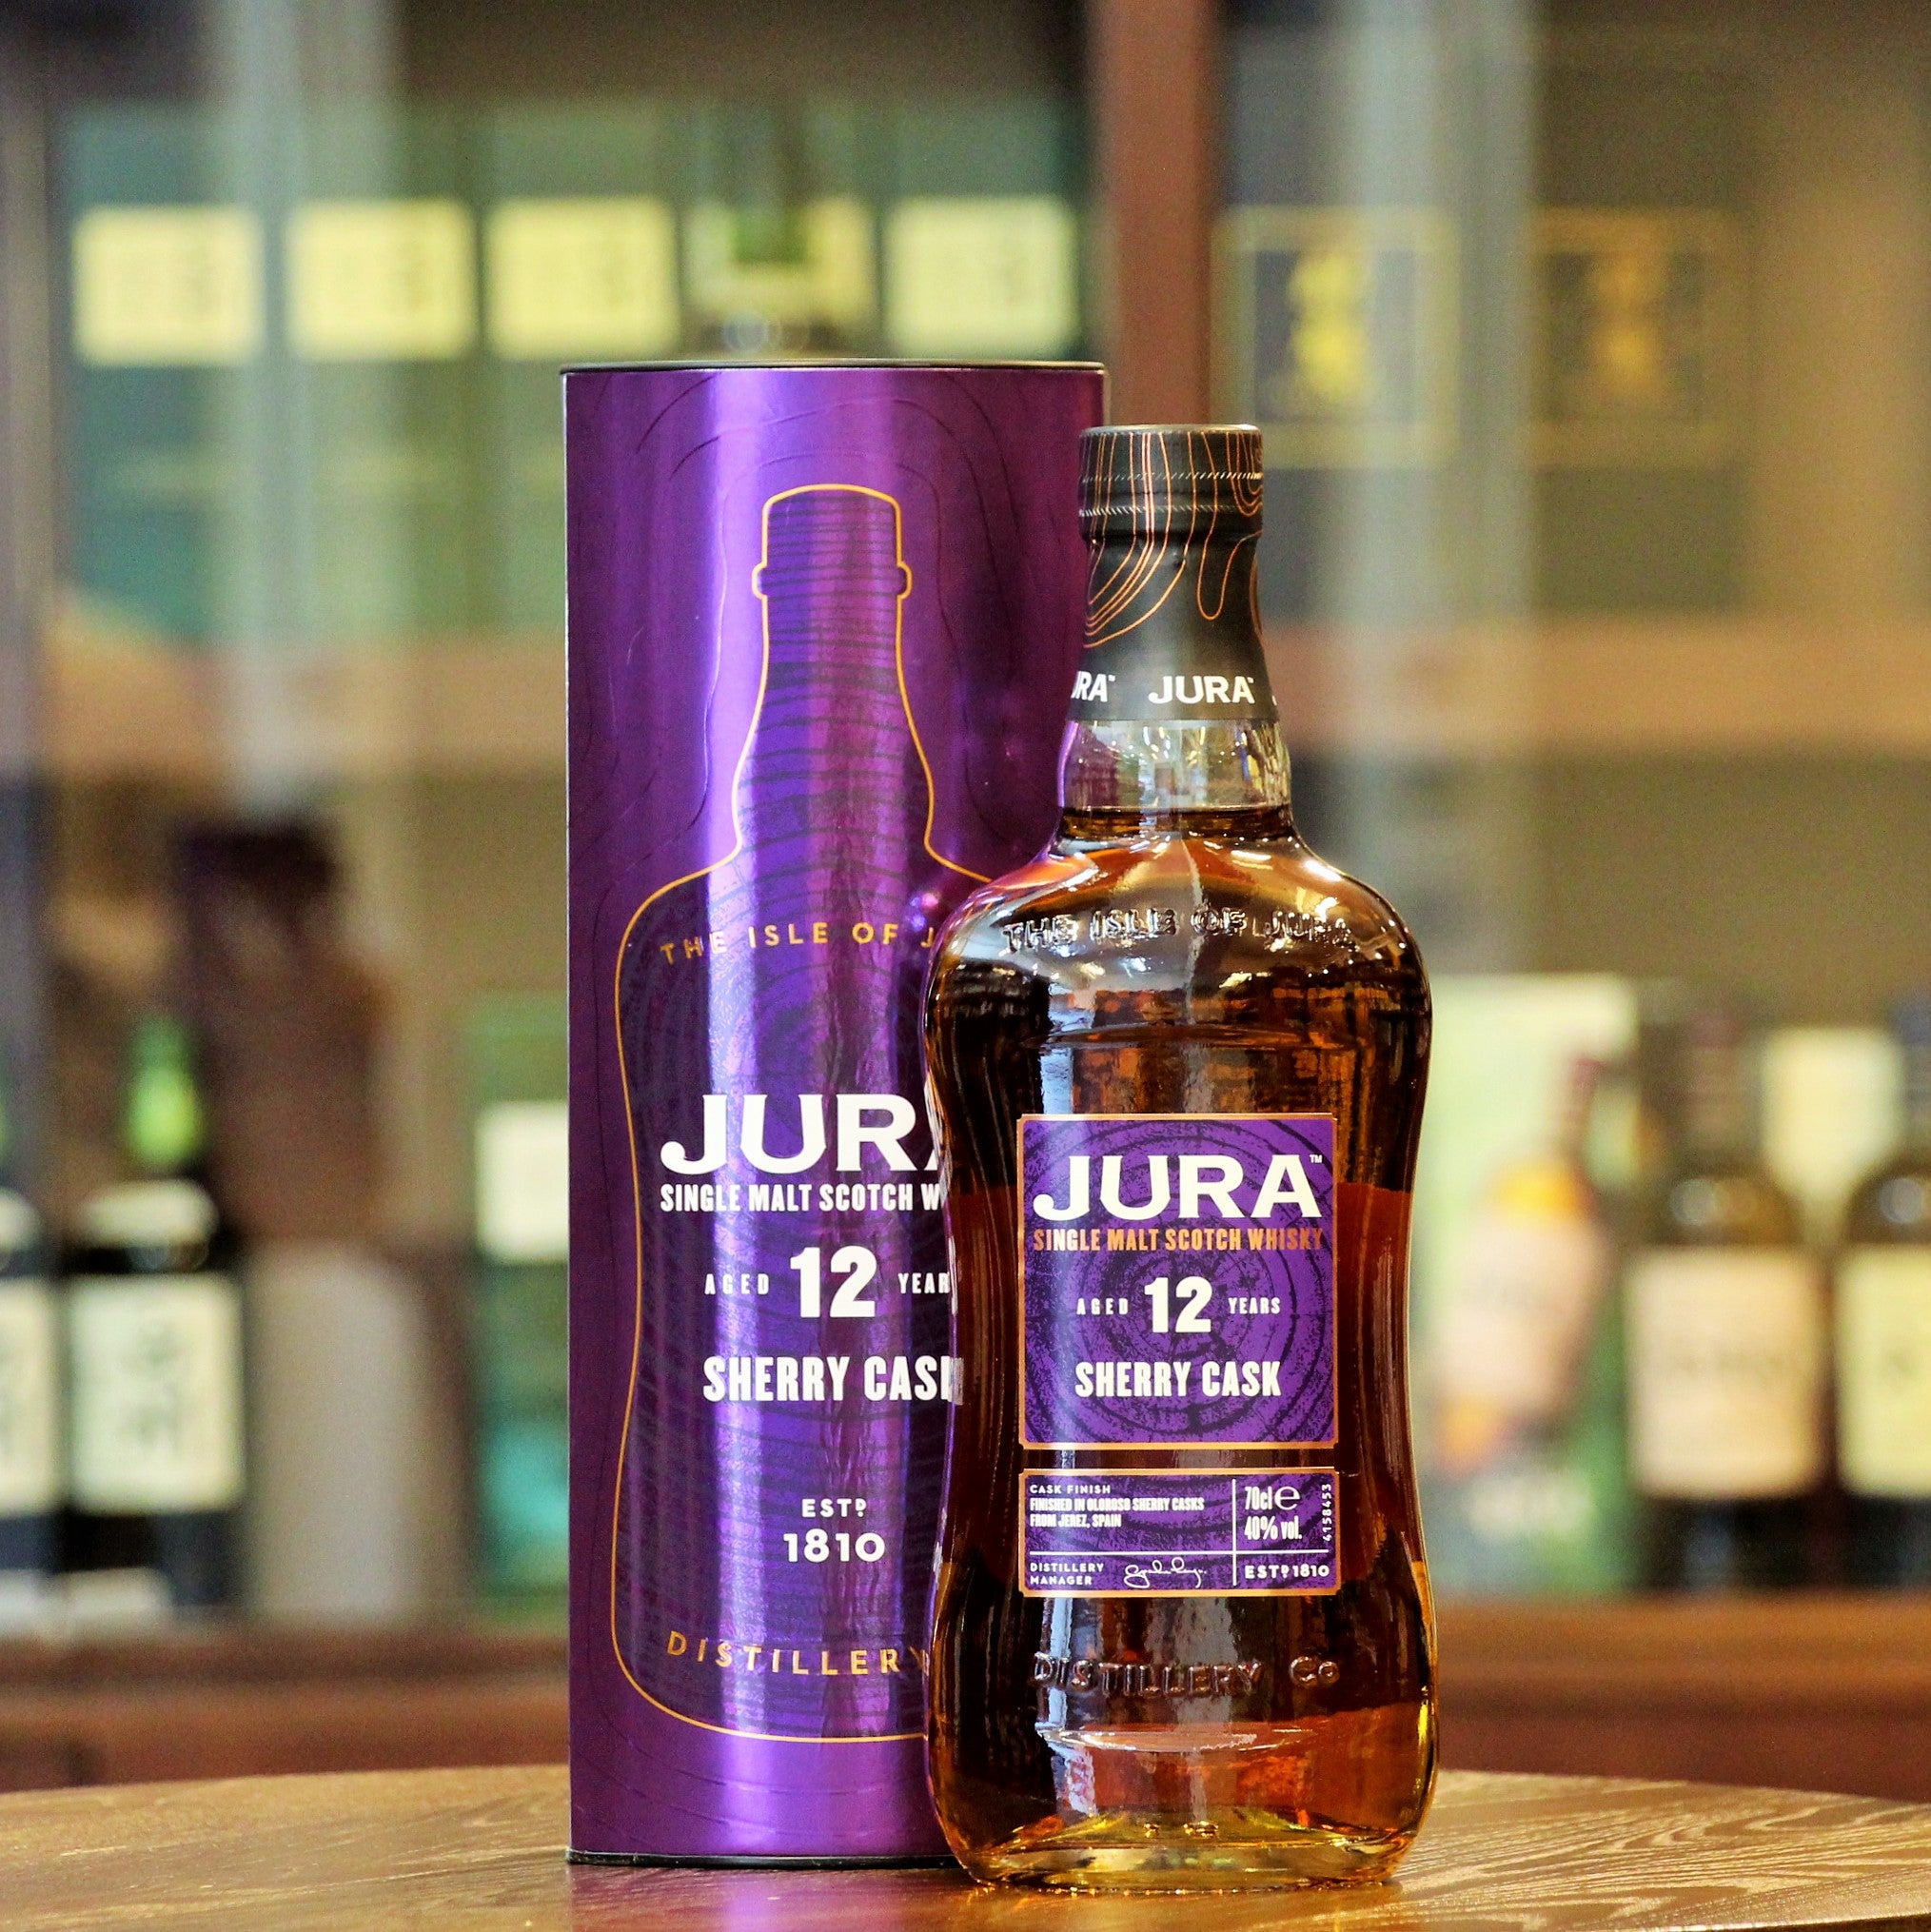 Finished in Oloroso Sherry Casks, this 12 Year Old Whisky from Jura was originally matured in ex-bourbon casks delivering sweet and fruity notes.